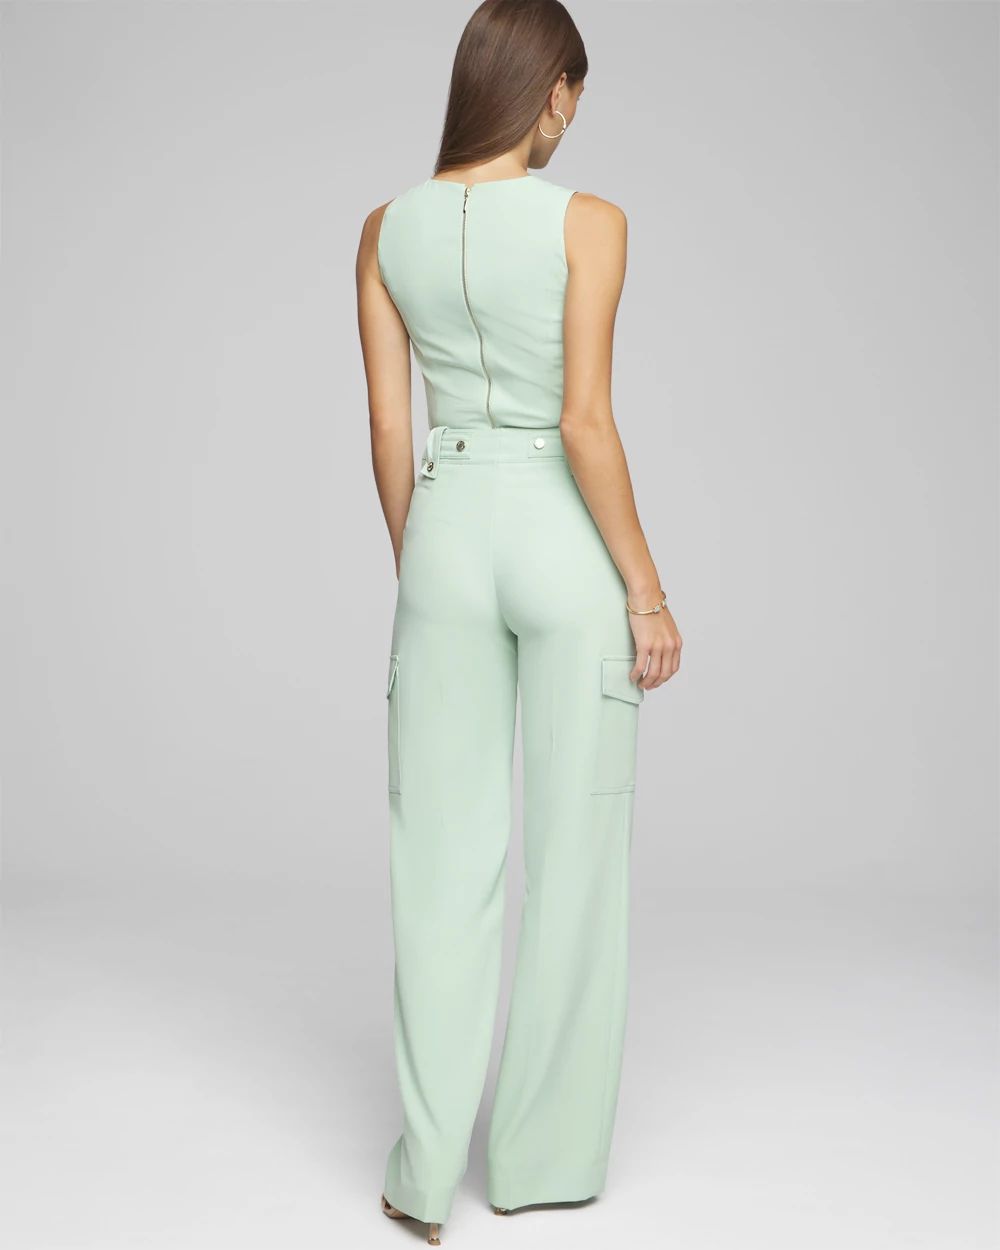 Petite Utility Wide Leg Pants click to view larger image.